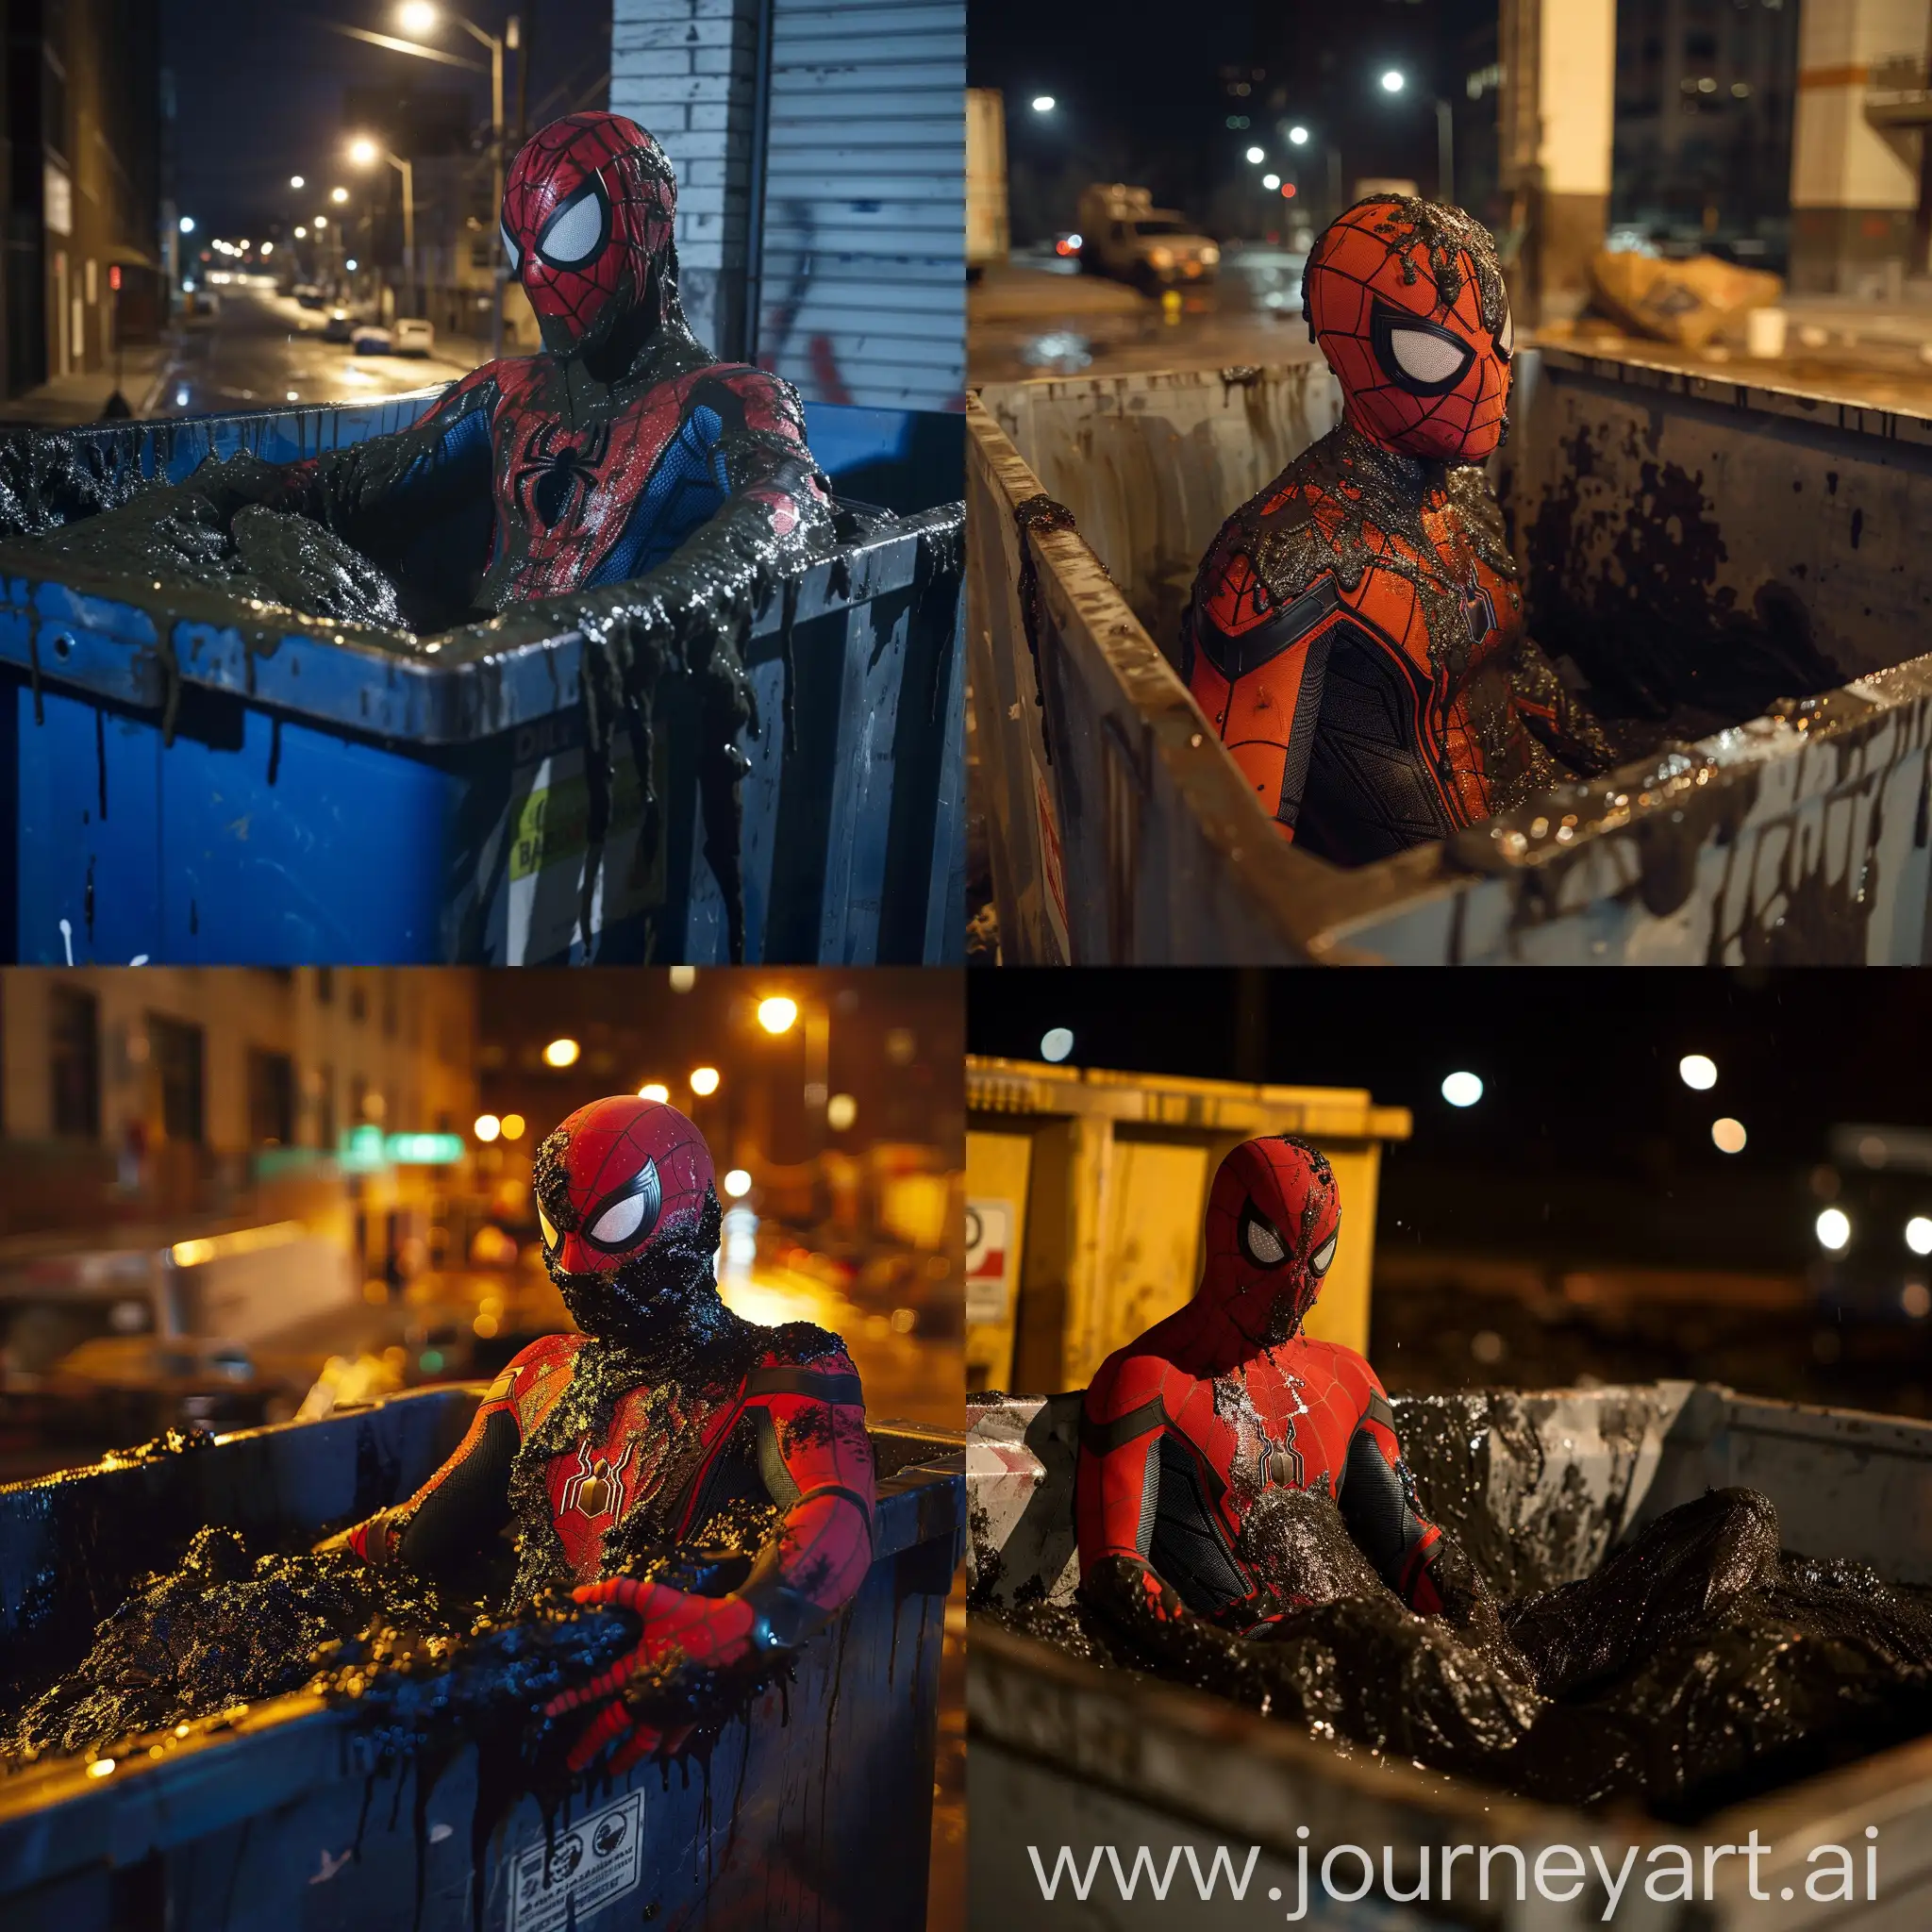 Spiderman covered in tar passed out in a dumpster at night